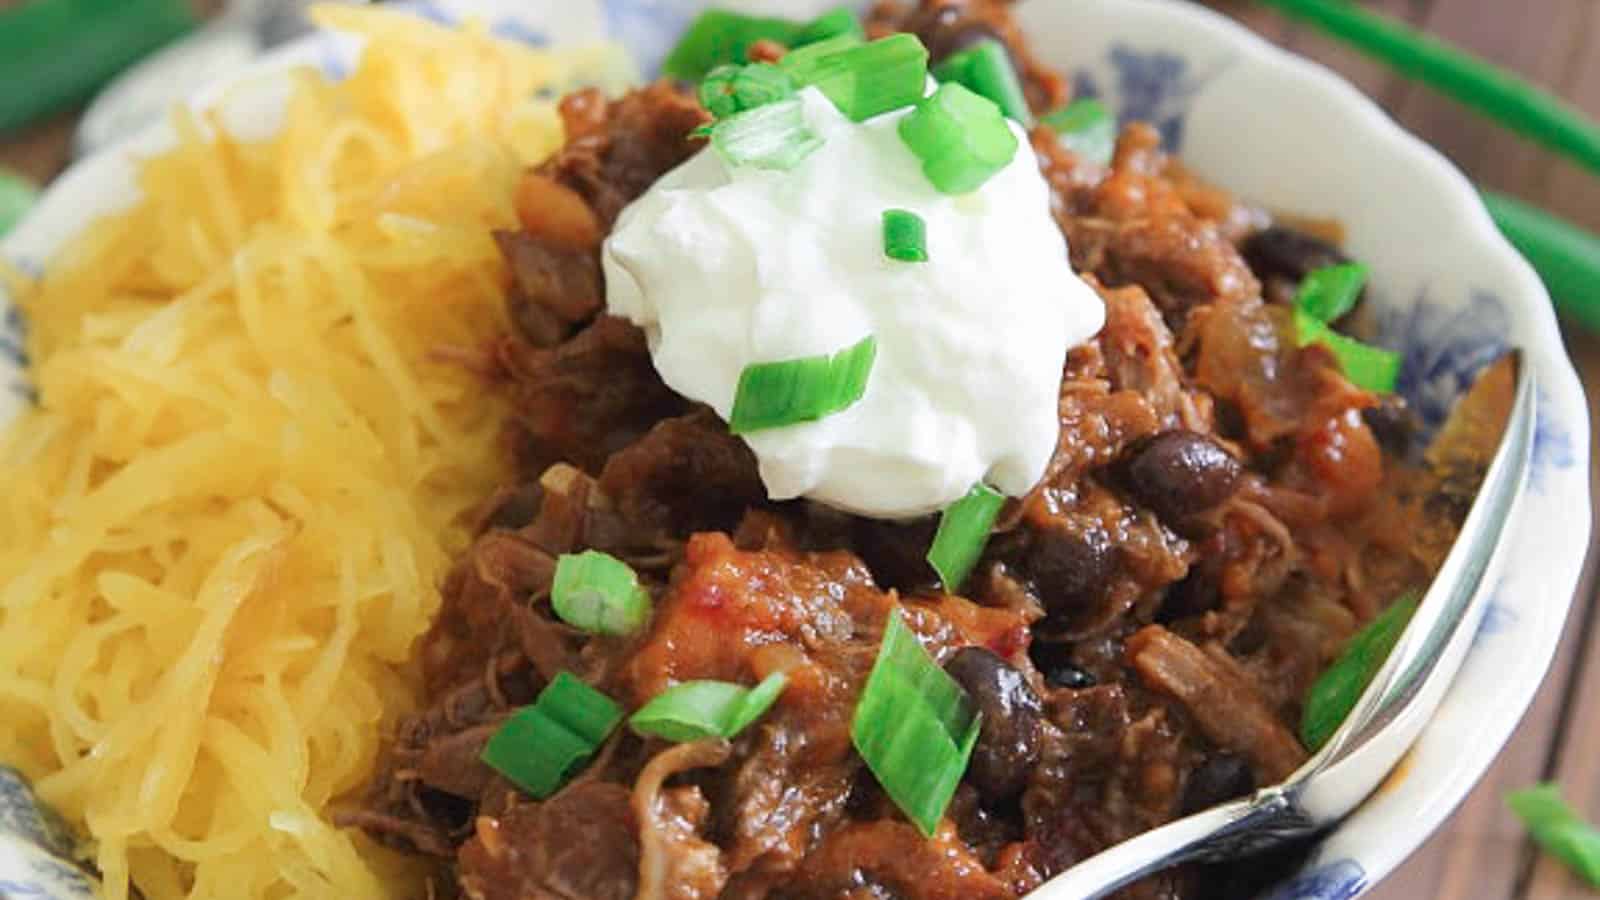 A bowl of chili with noodles and sour cream.